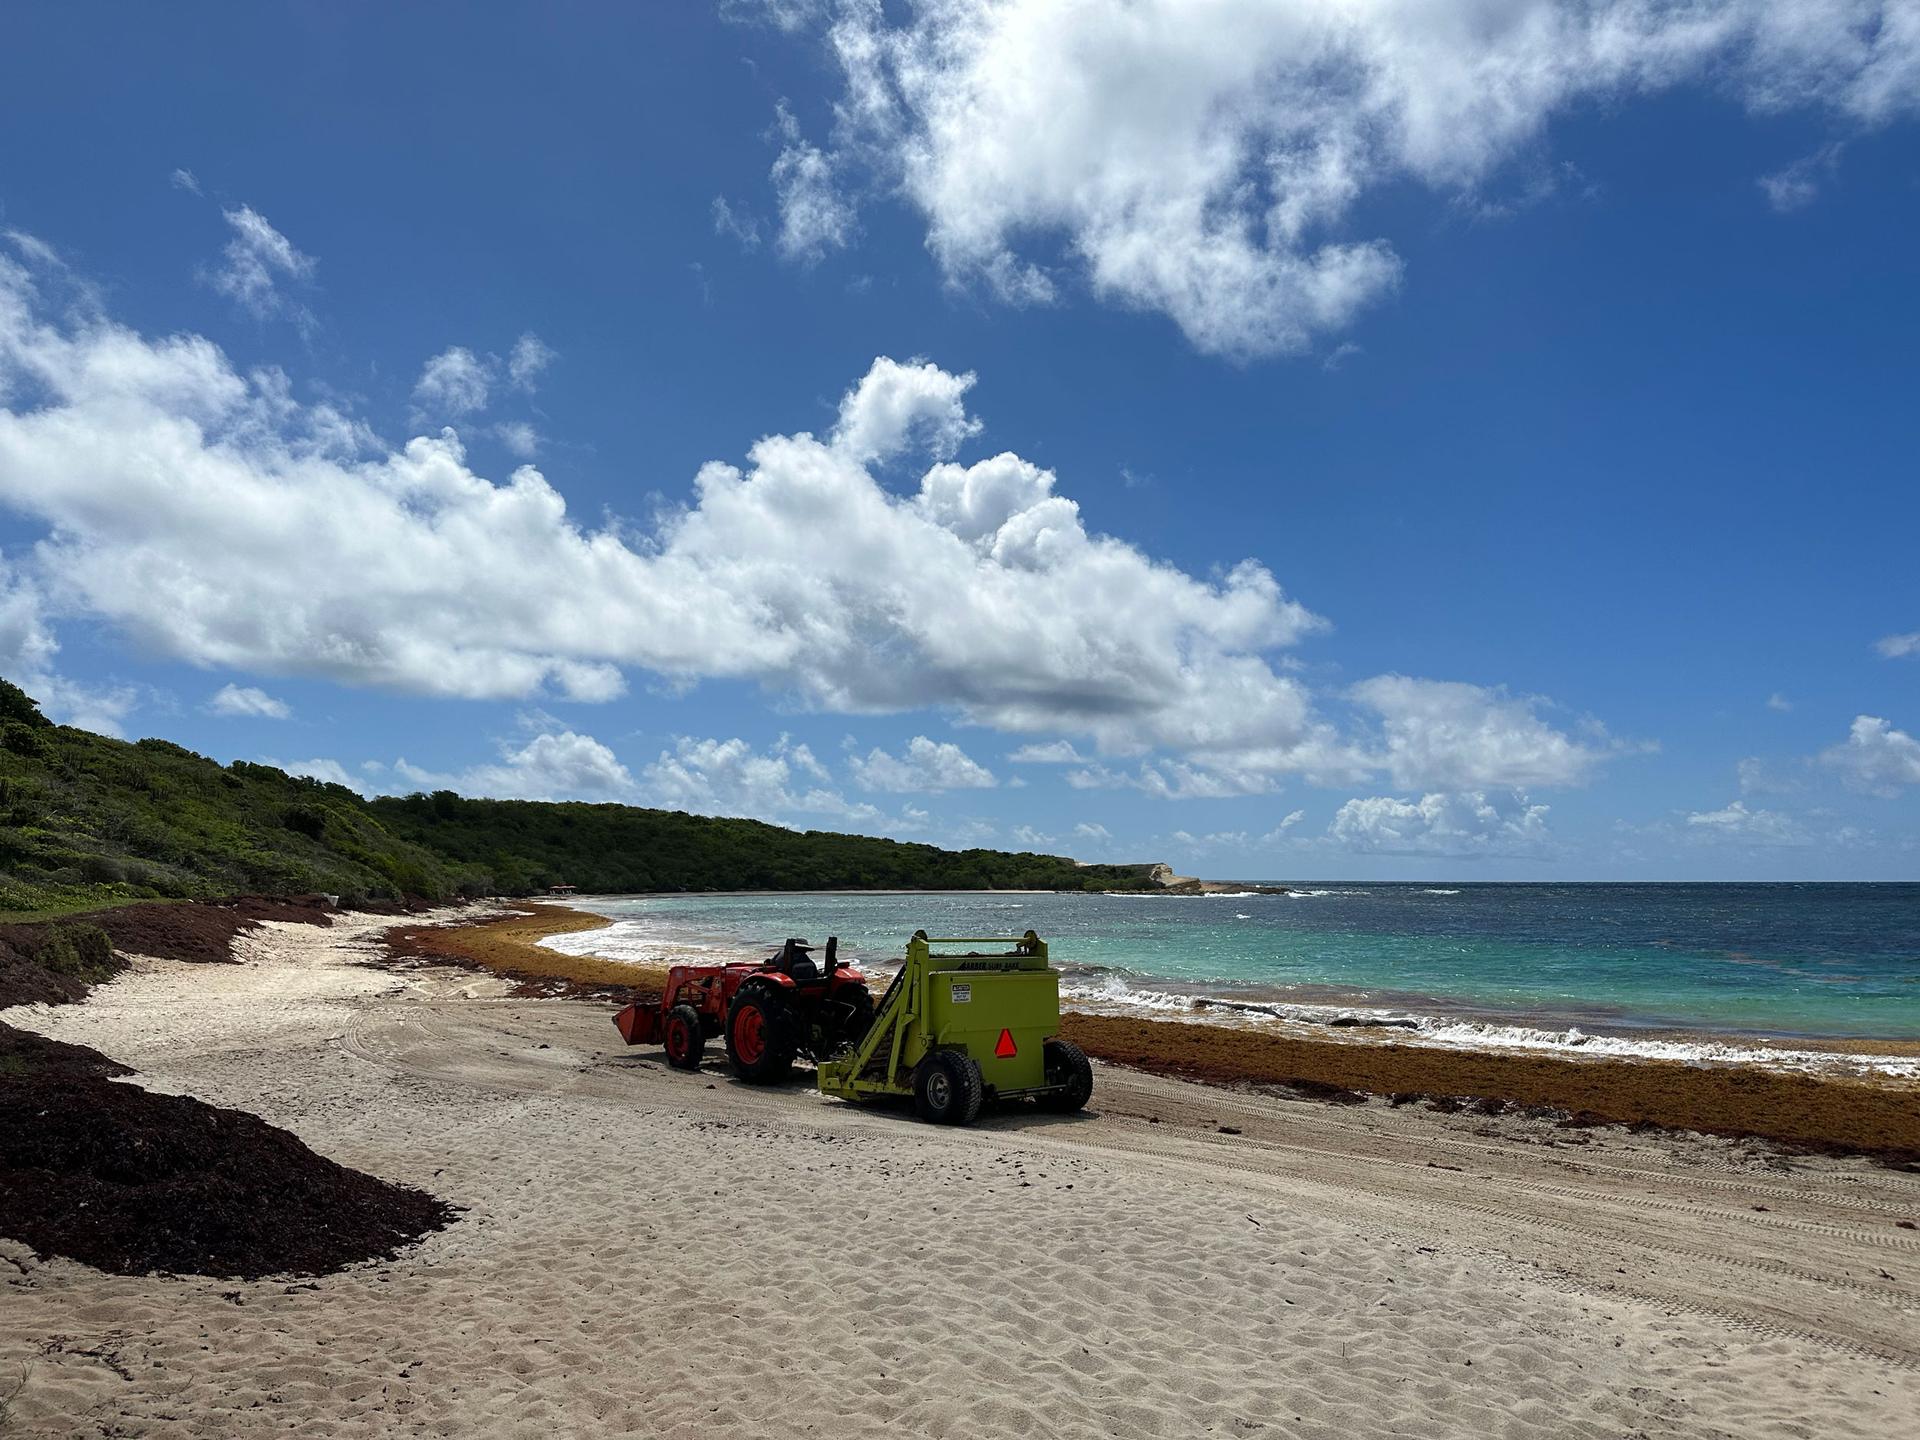 In late May, the only person at Half Moon Bay in Antigua was a tractor worker, removing sargassum that was covering the whole beach.